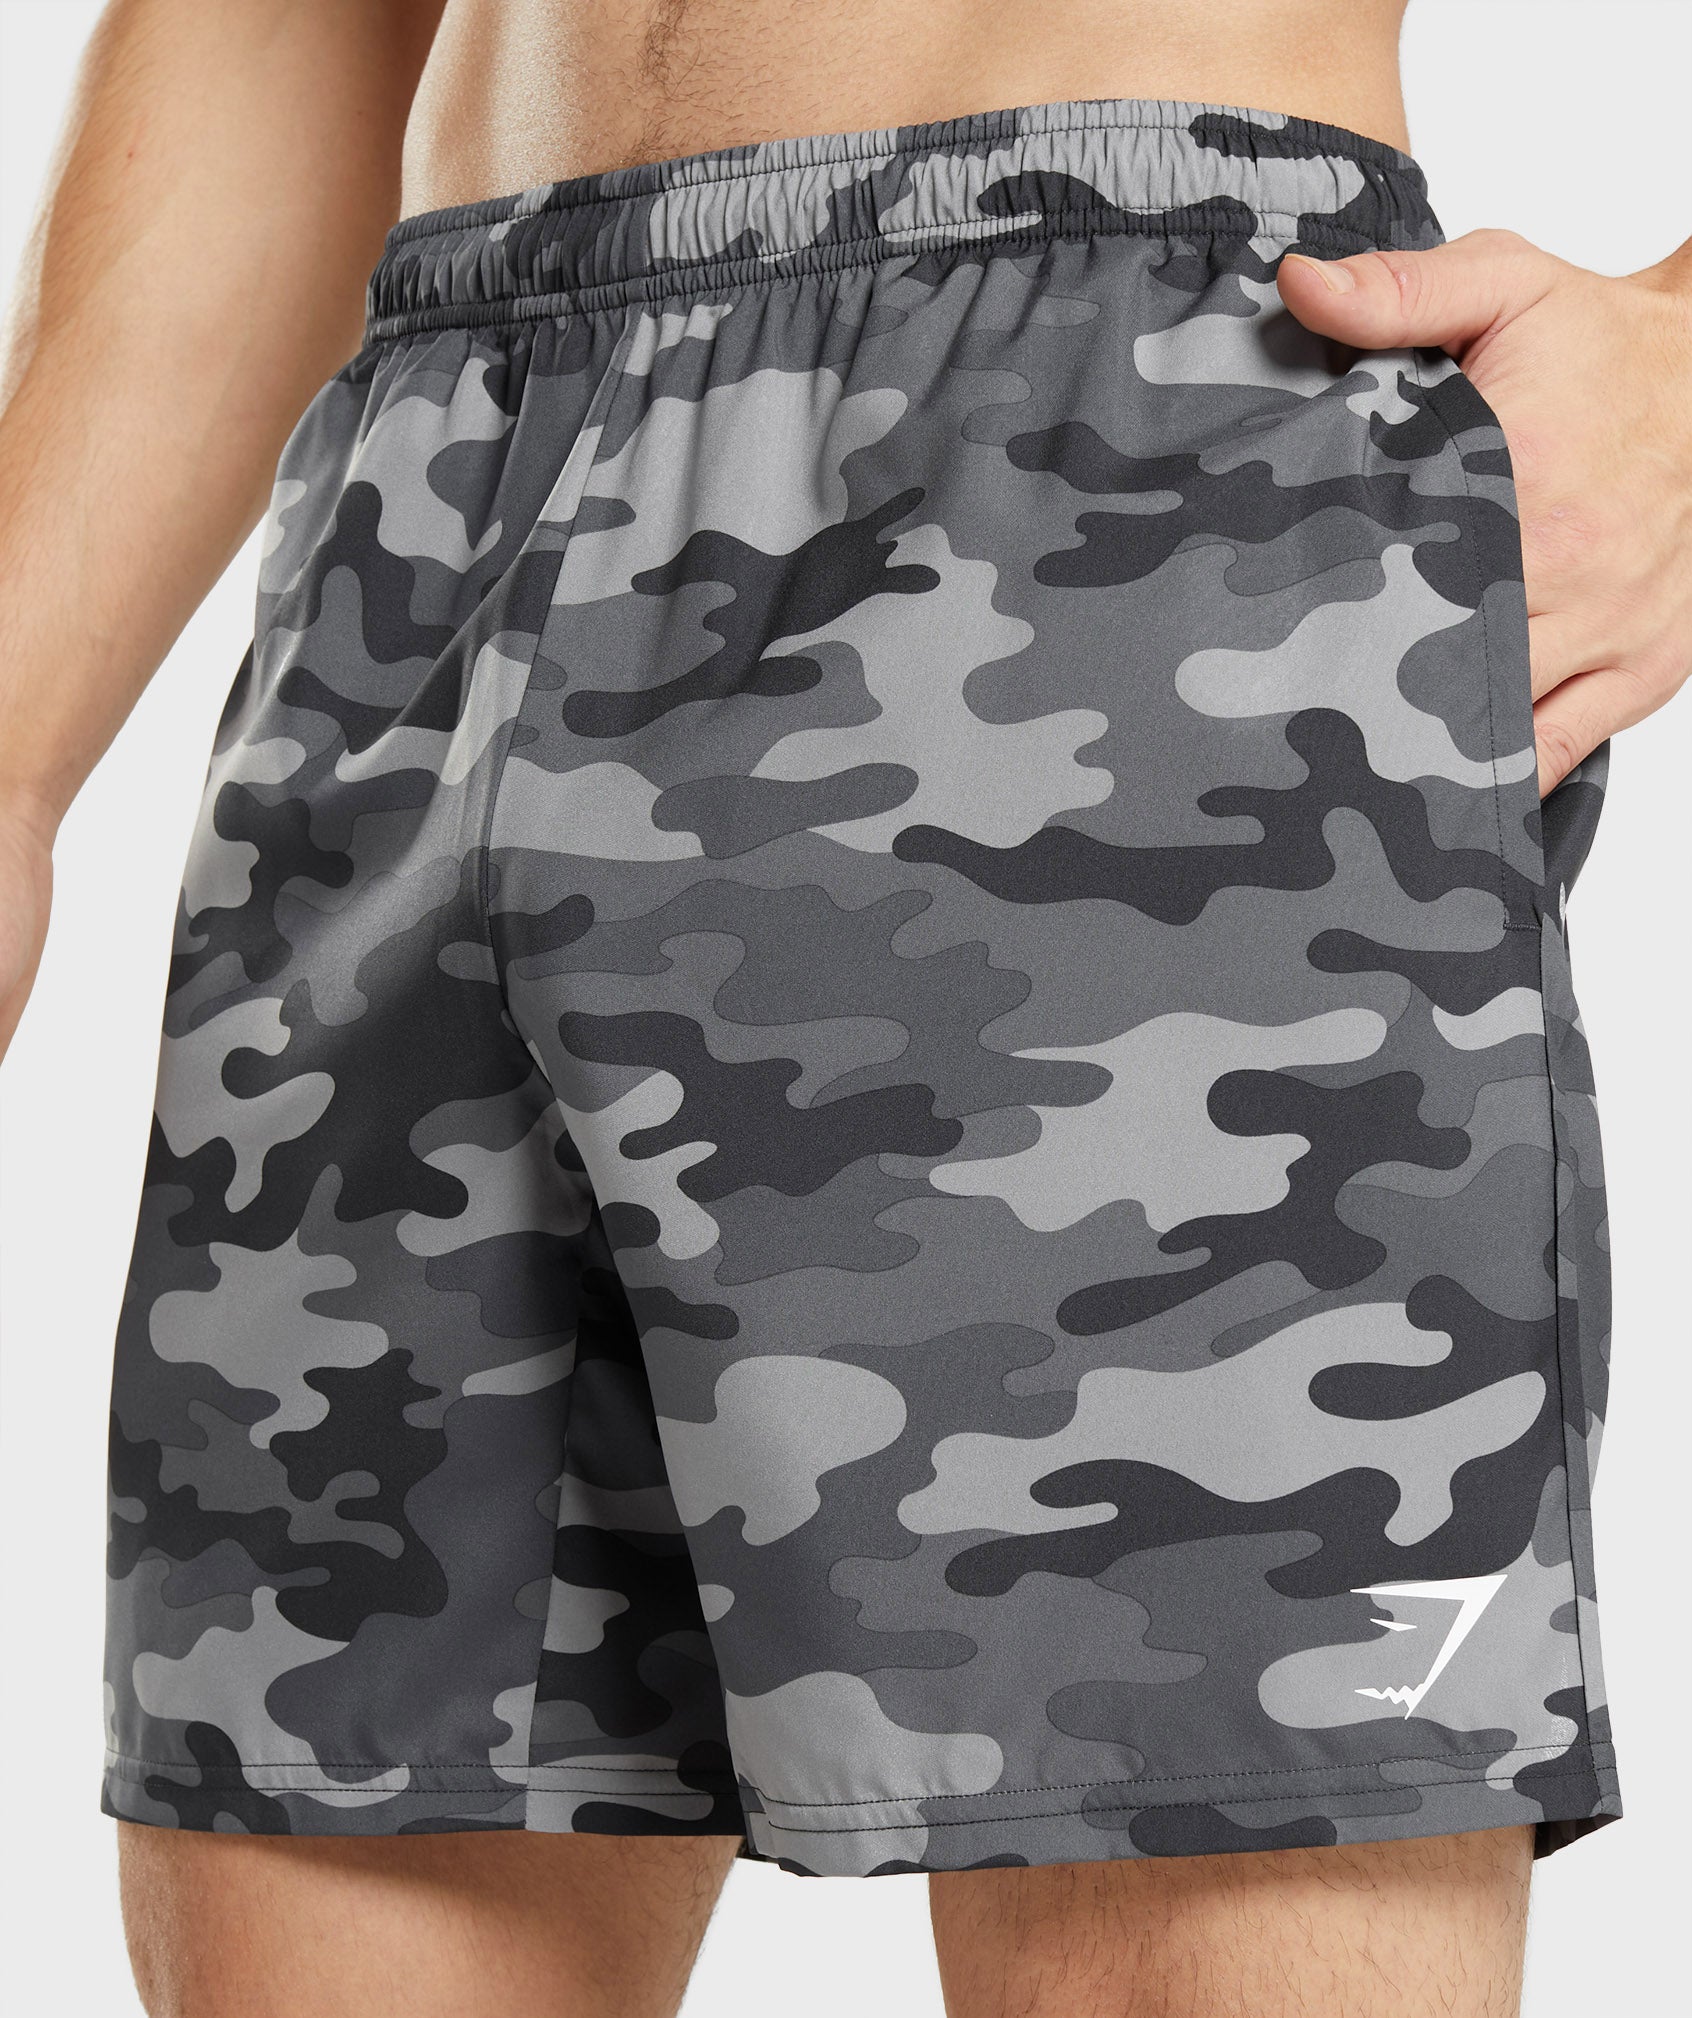 Arrival Shorts in Grey Print - view 6